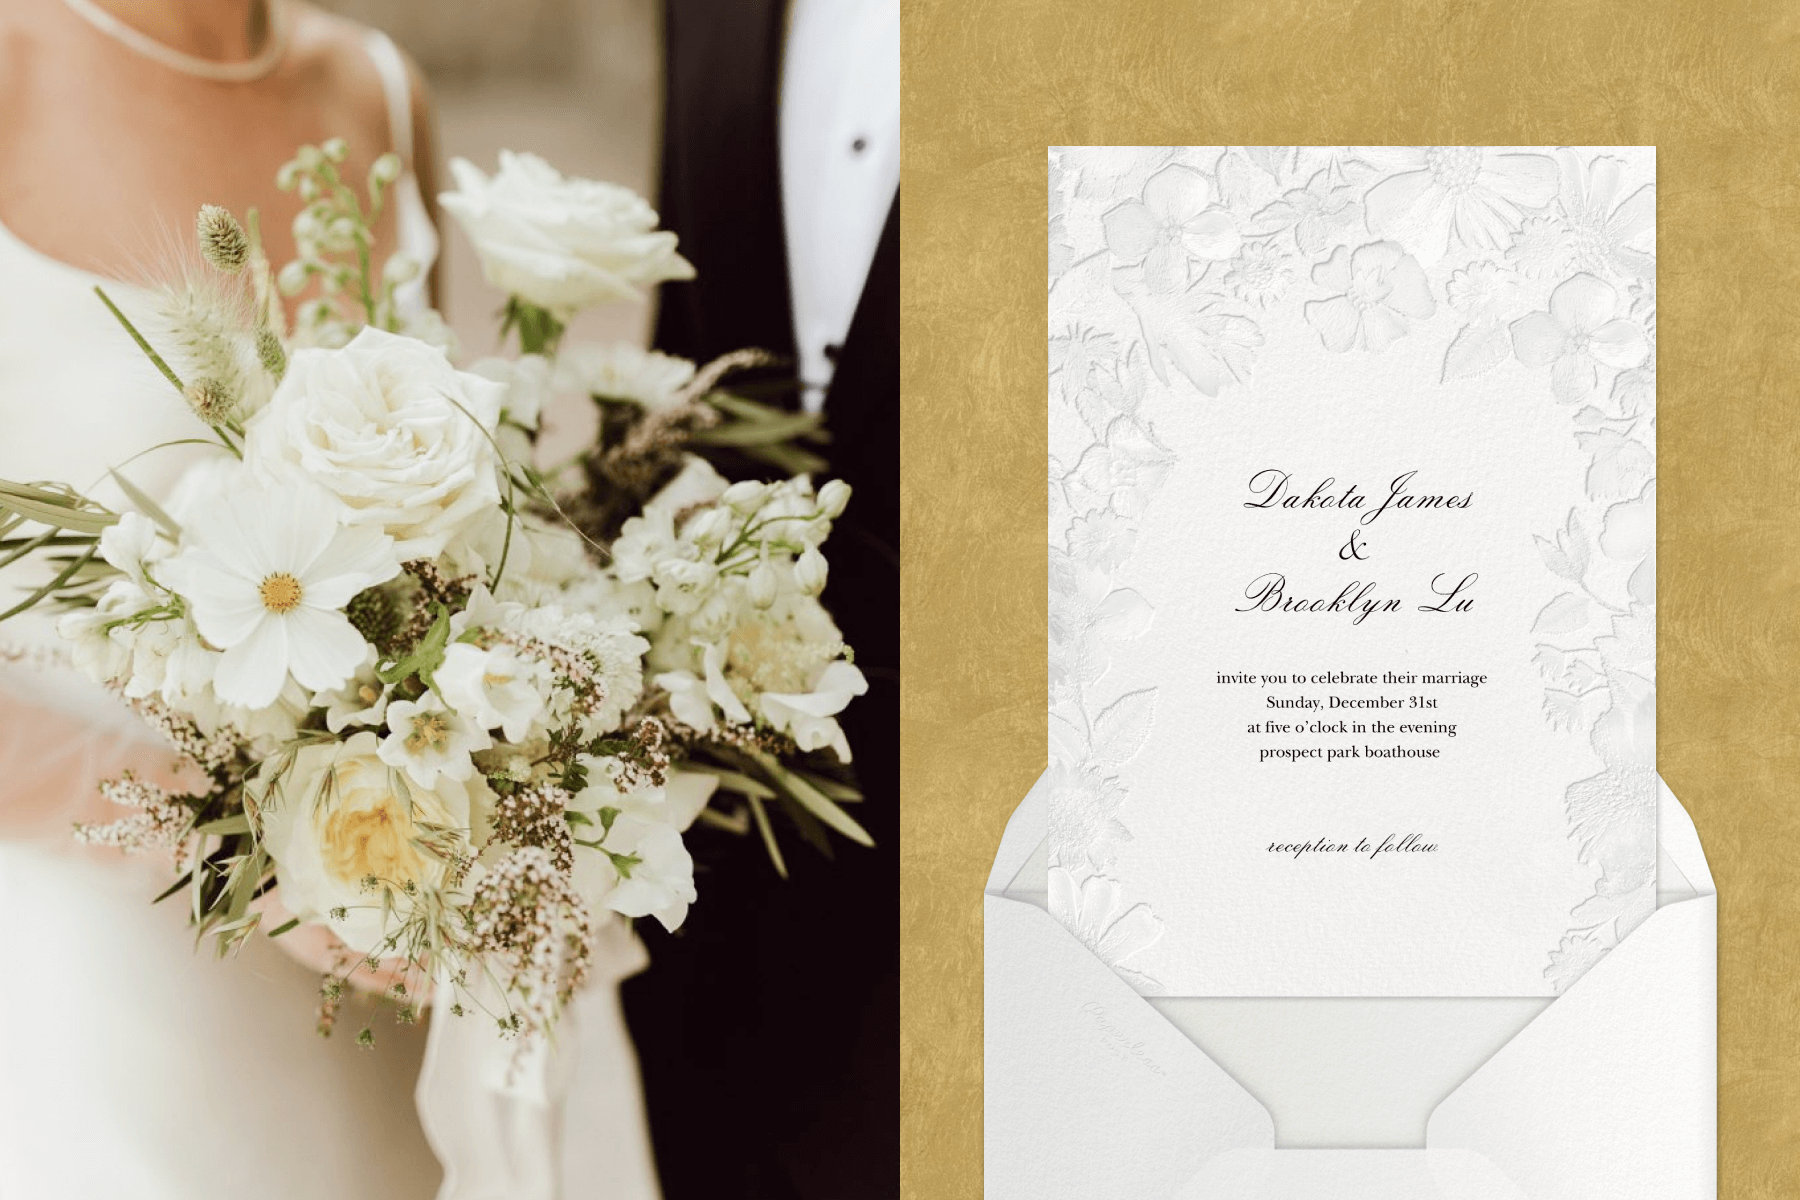 Left: A close-up of an all-white wedding bouquet; Right: A white floral embossed wedding invitation on a gold background.